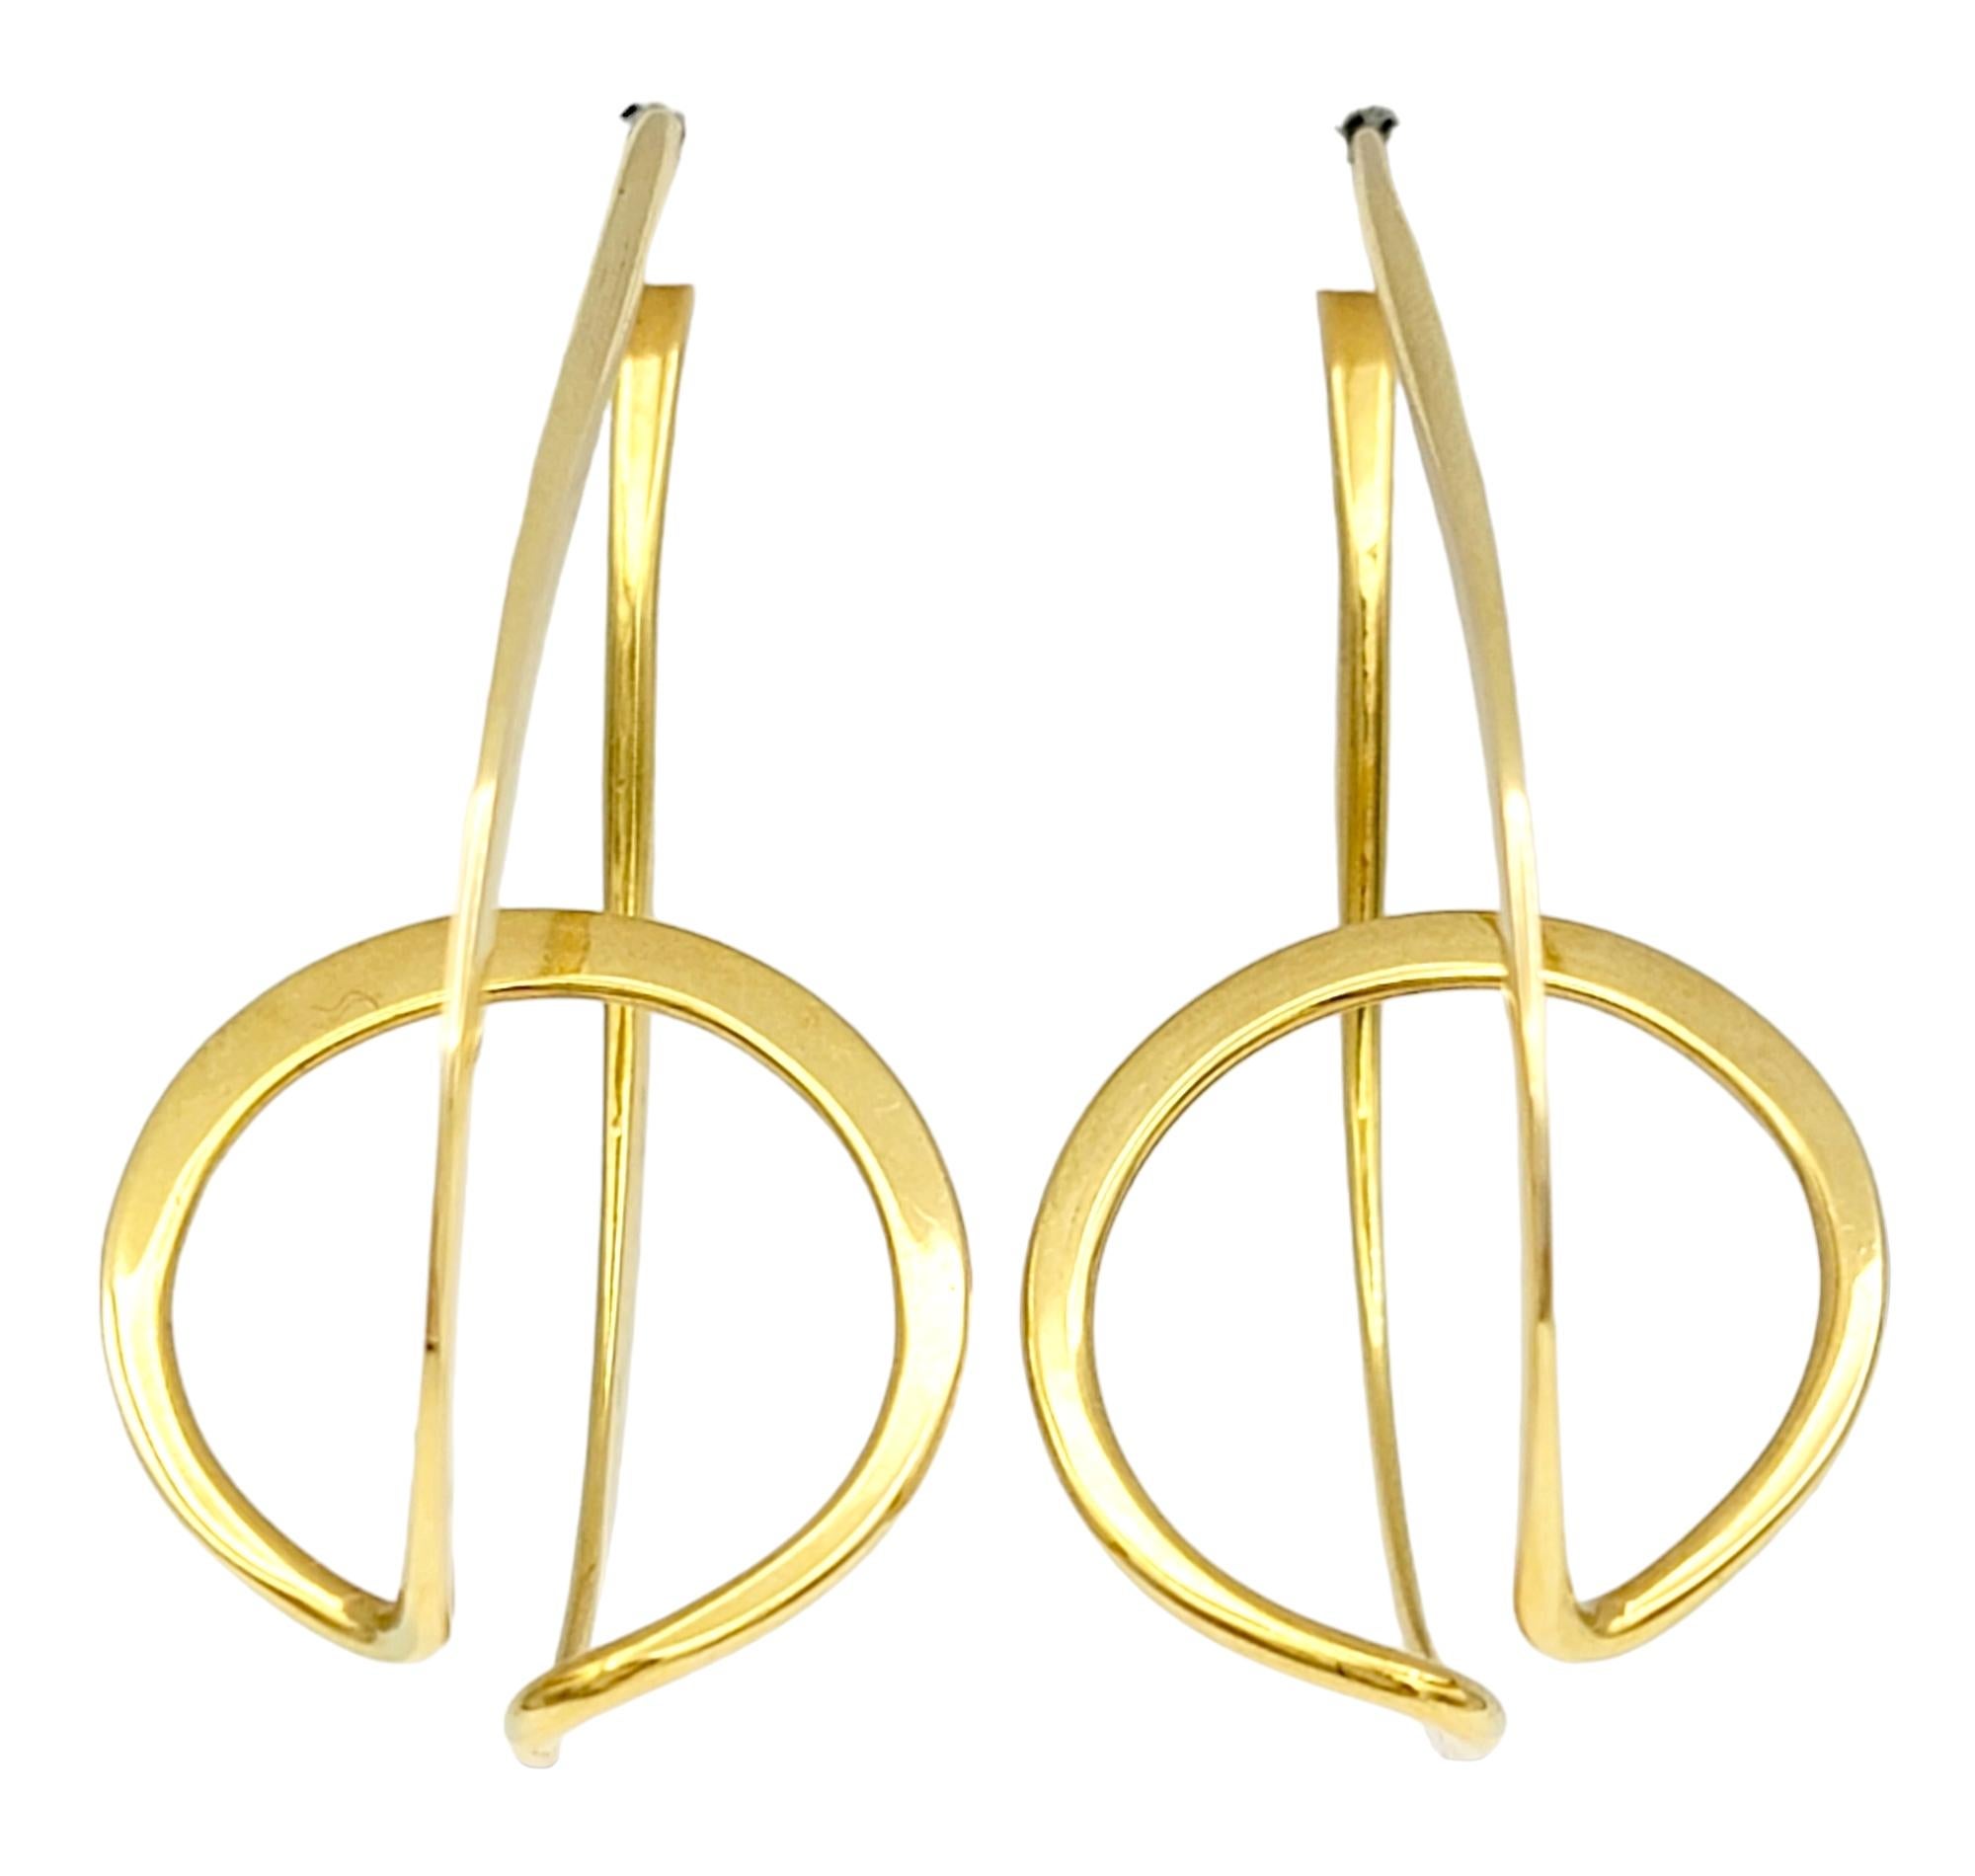 Elegance meets innovation in this distinctive pair of gold earrings, a masterpiece of design by Ronald Pearson. Crafted from 14-karat forged gold, these earrings showcase a seamless blend of creativity and quality.

The earring is a single unbroken